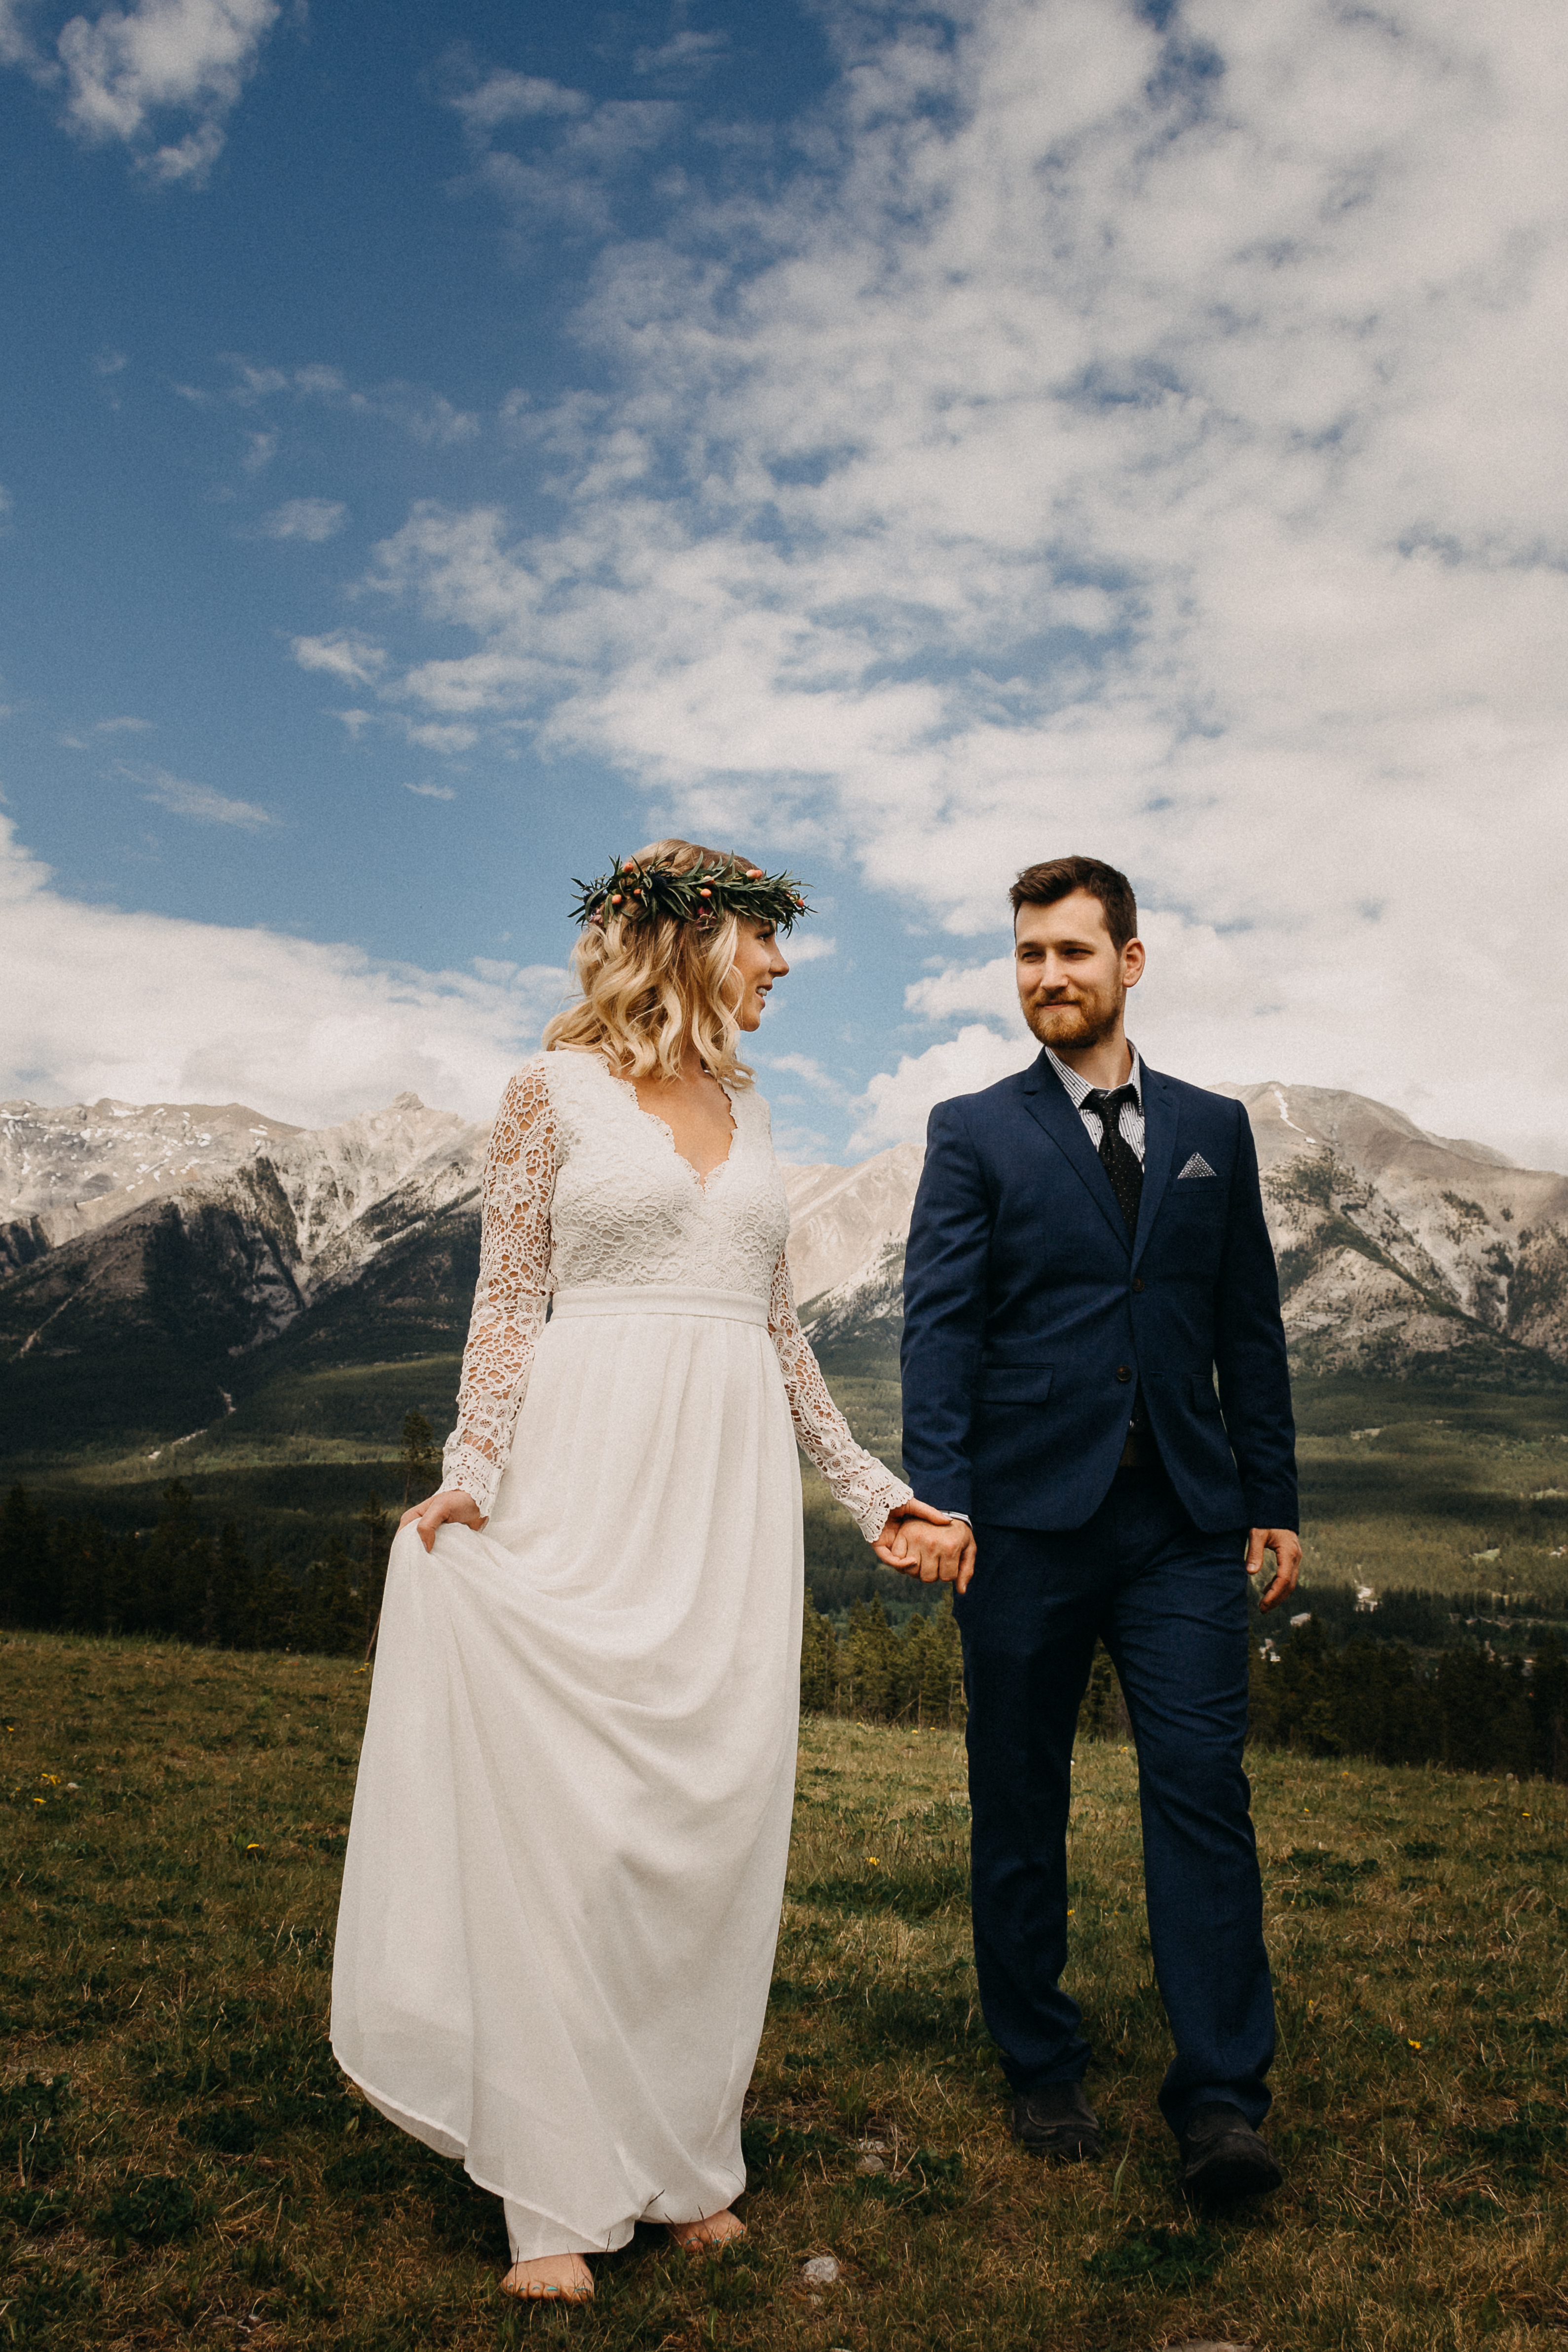 The bride and groom holding hands and looking at each other in front of the rocky mountains